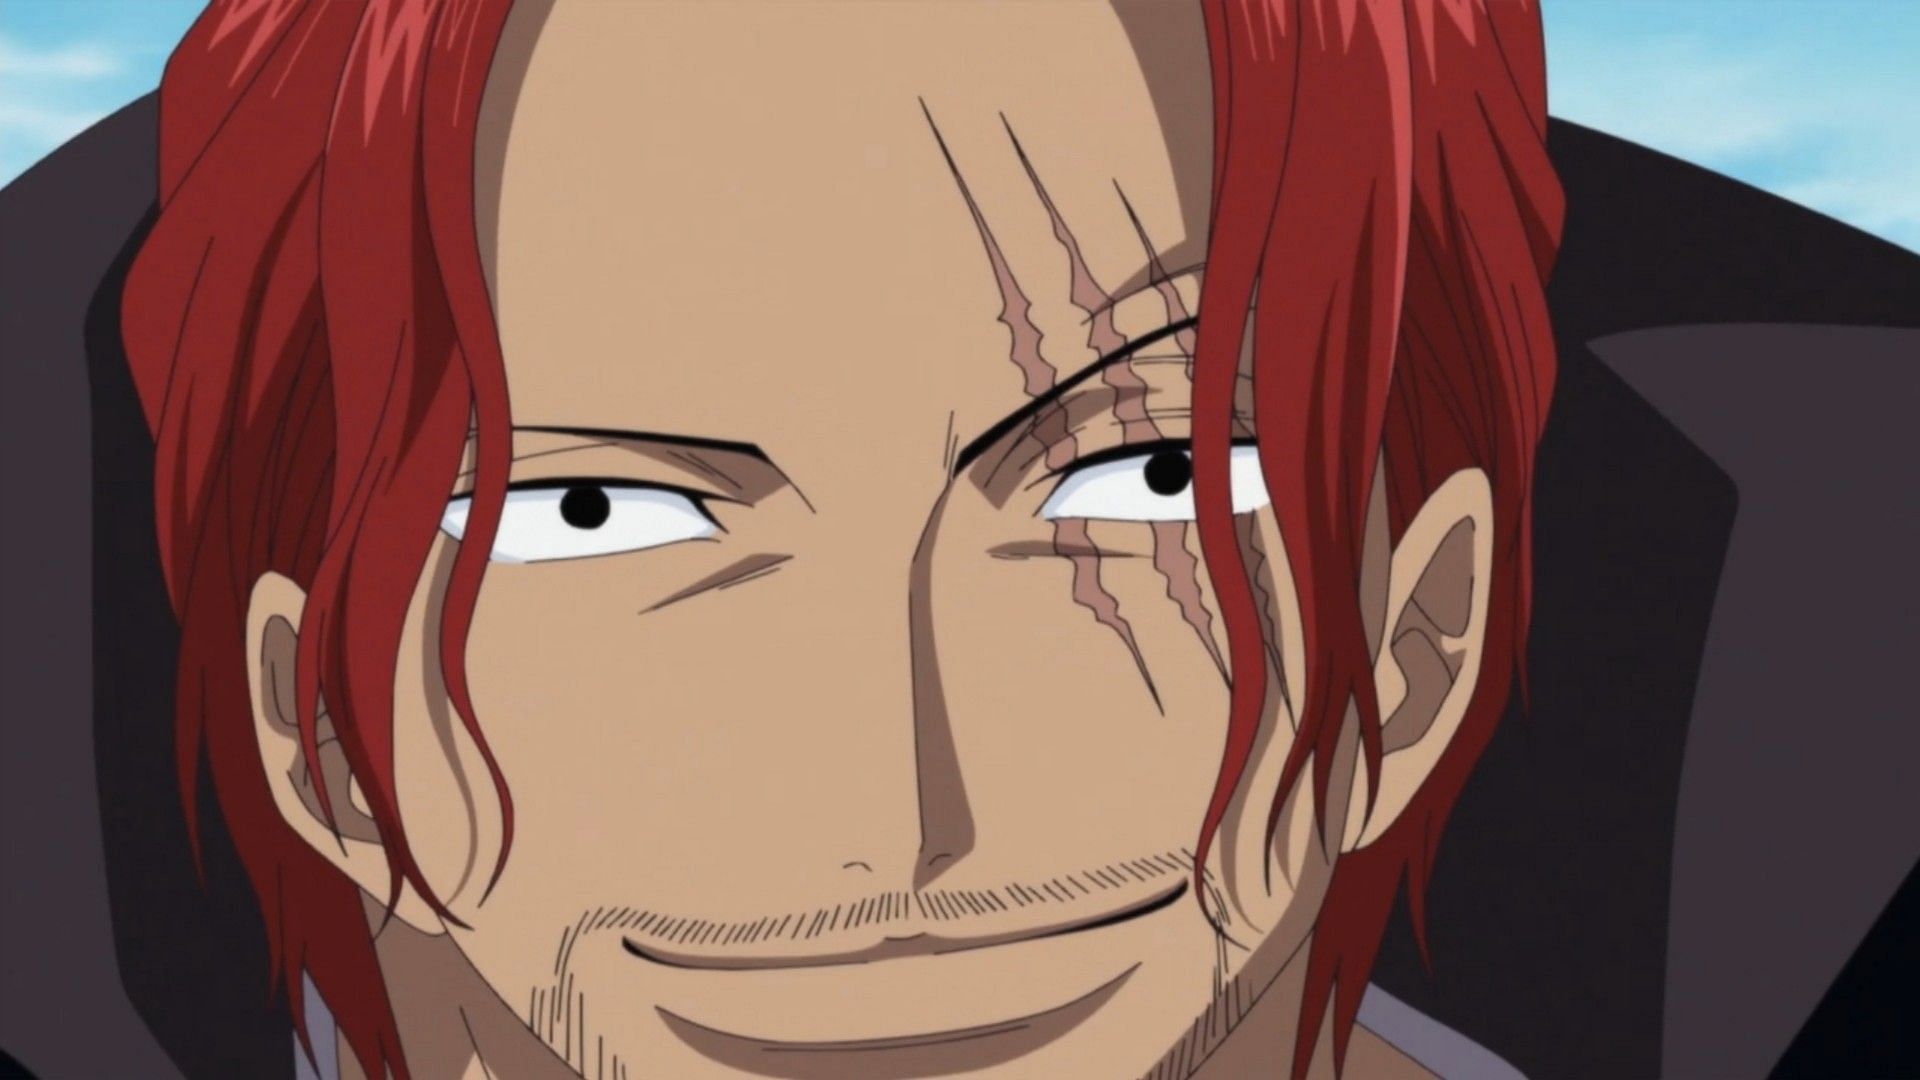 Shanks once again steals the show in the latest chapter of One Piece (Image Credits: Eiichiro Oda/Shueisha, Viz Media, One Piece)